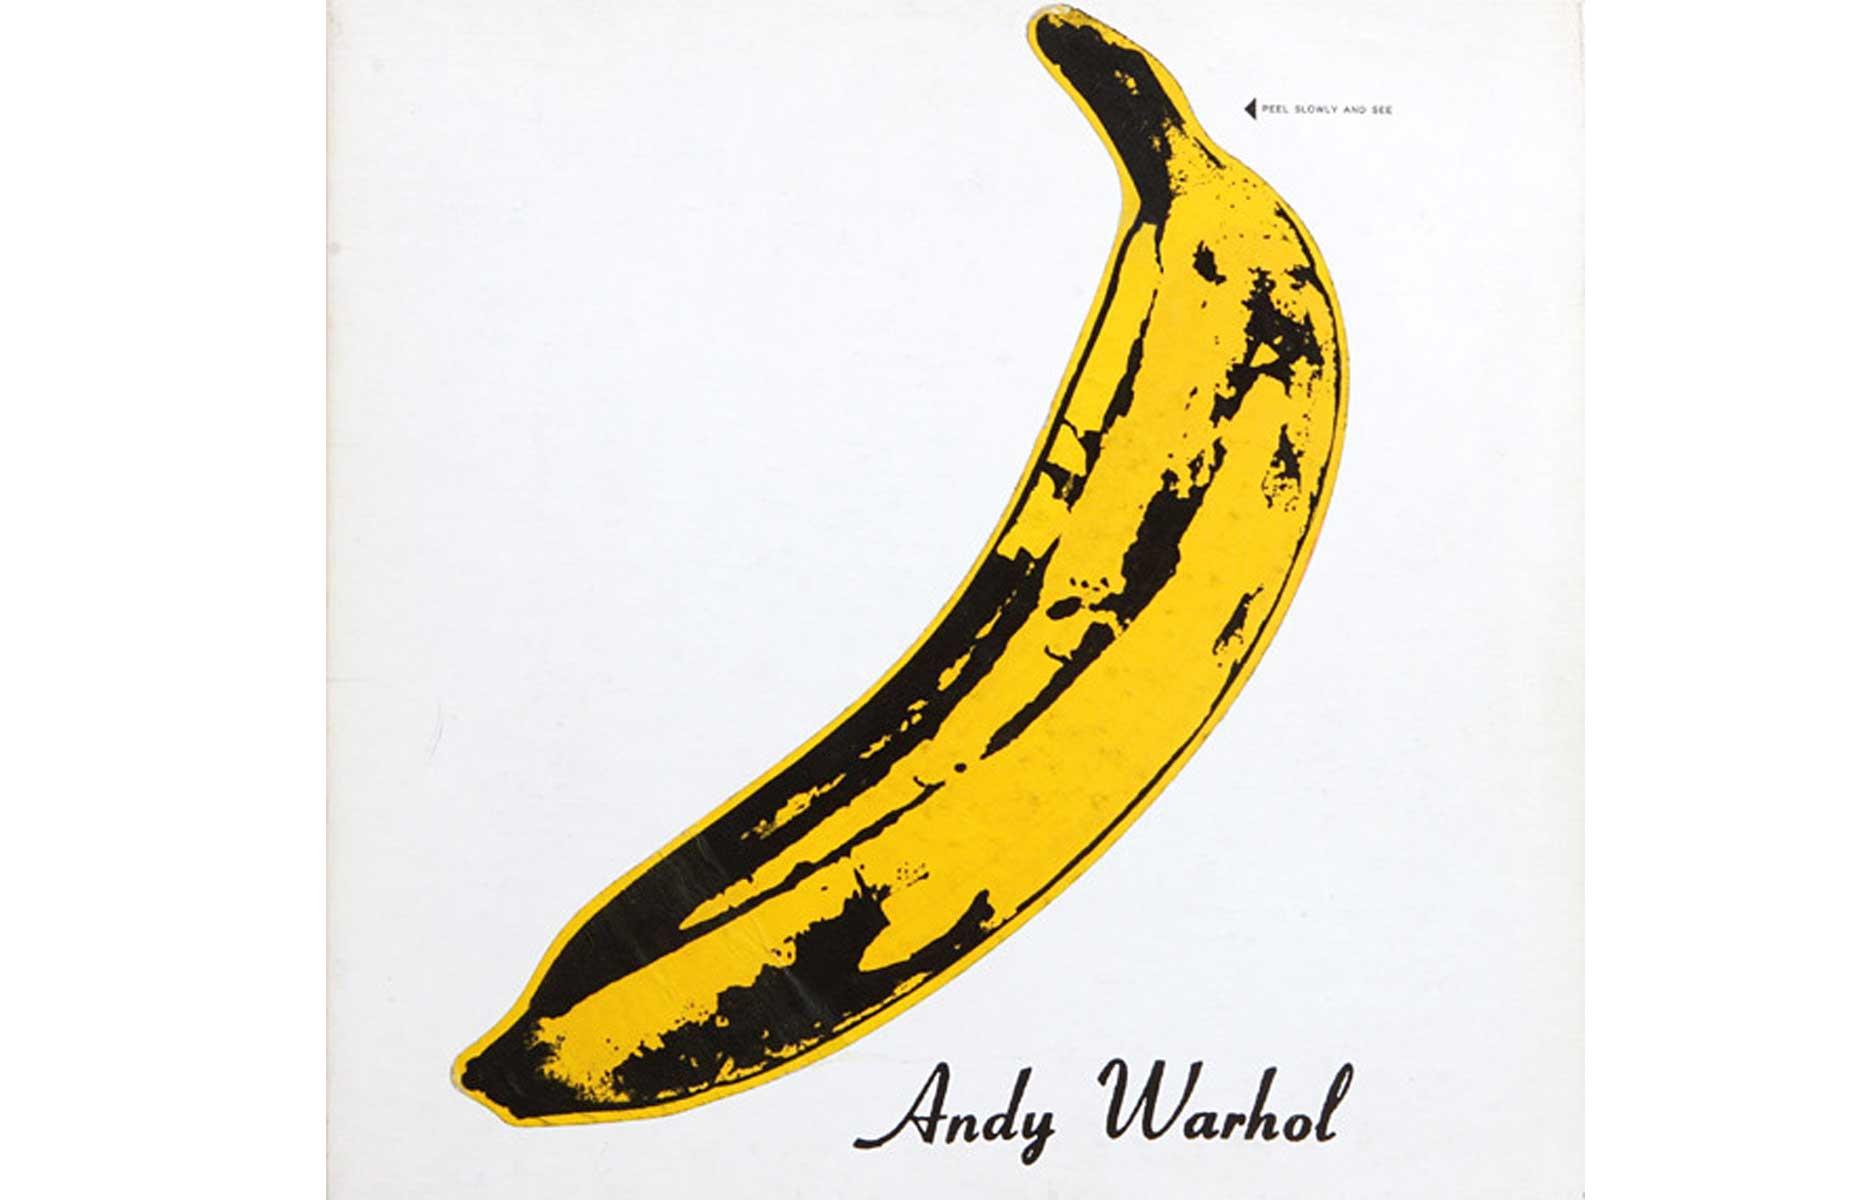 The Velvet Underground – The Velvet Underground & Nico: up to $4,500 (£3,823)